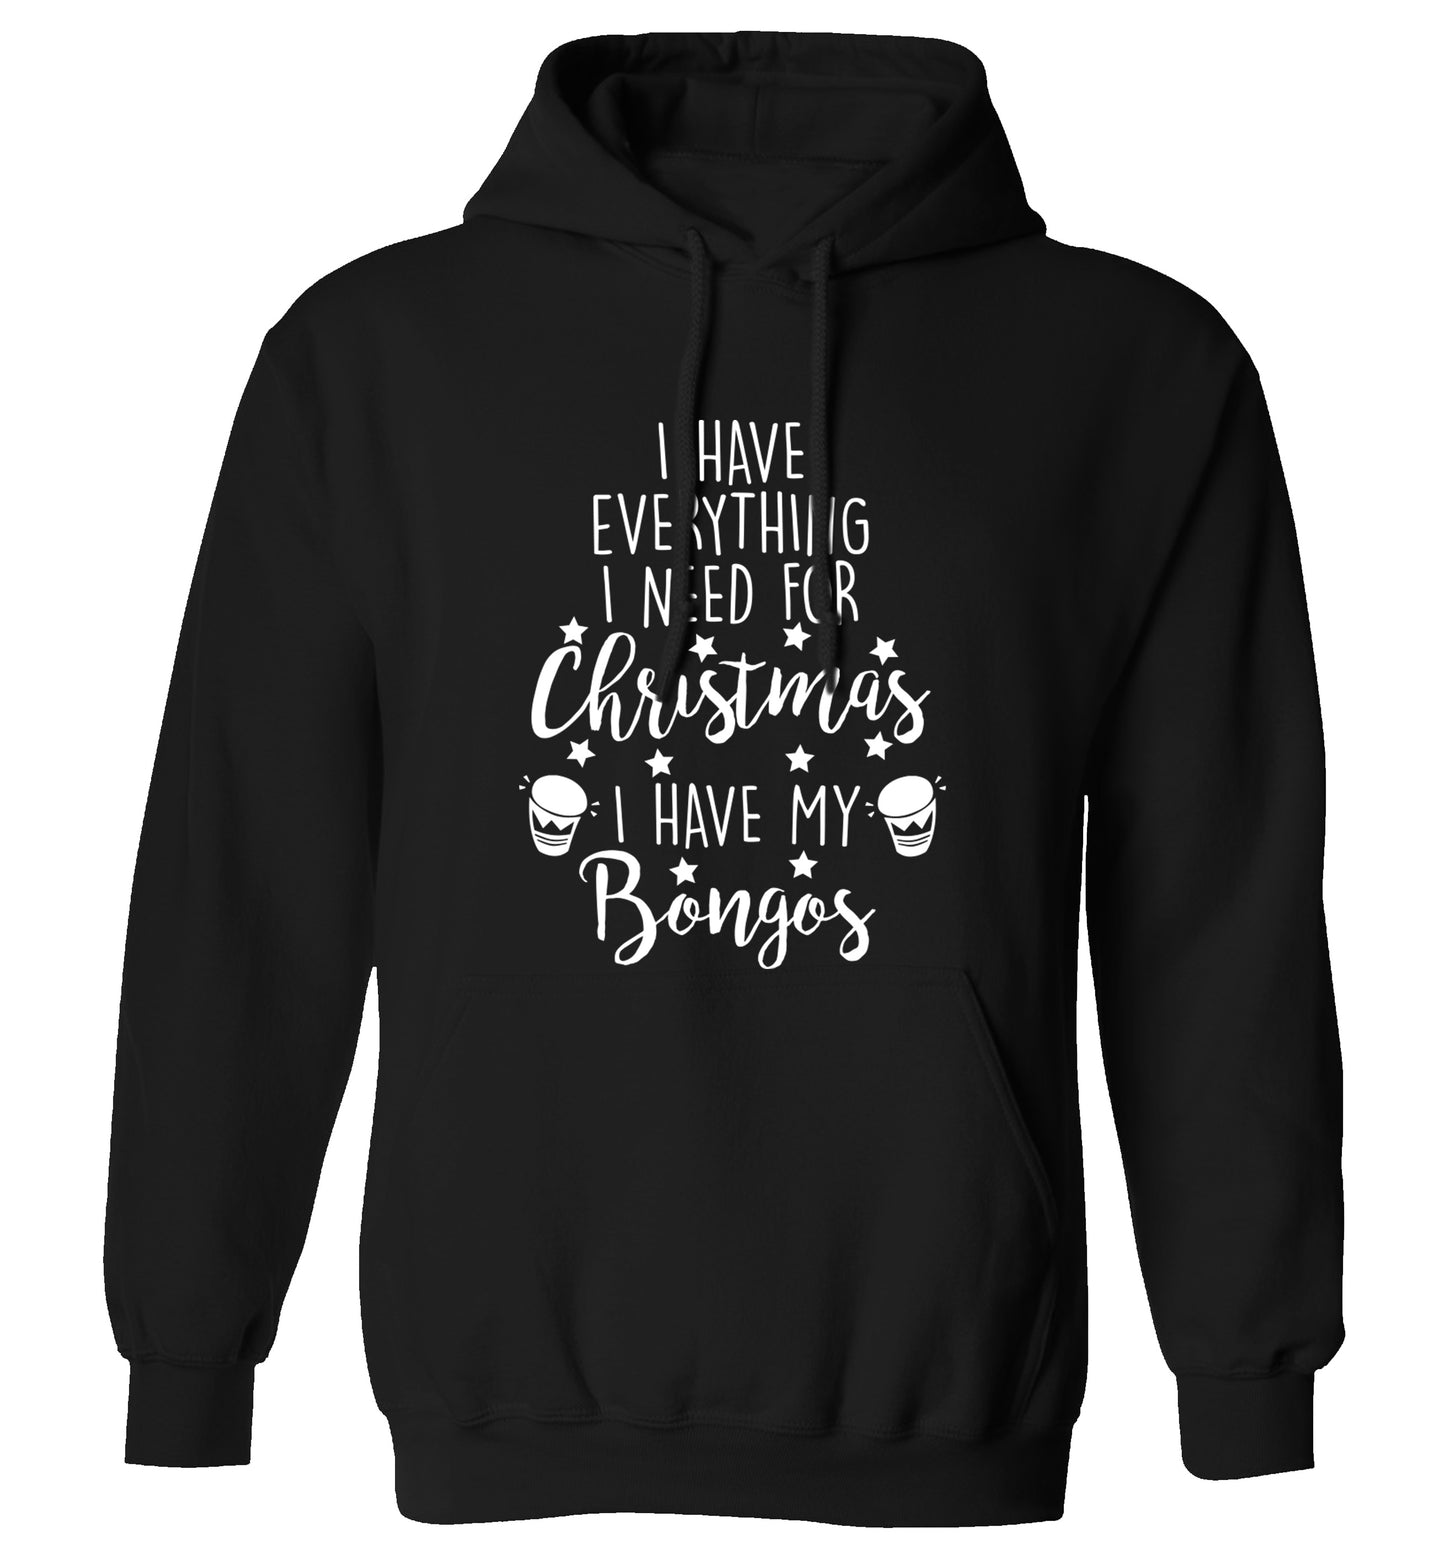 I have everything I need for Christmas I have my bongos! adults unisex black hoodie 2XL